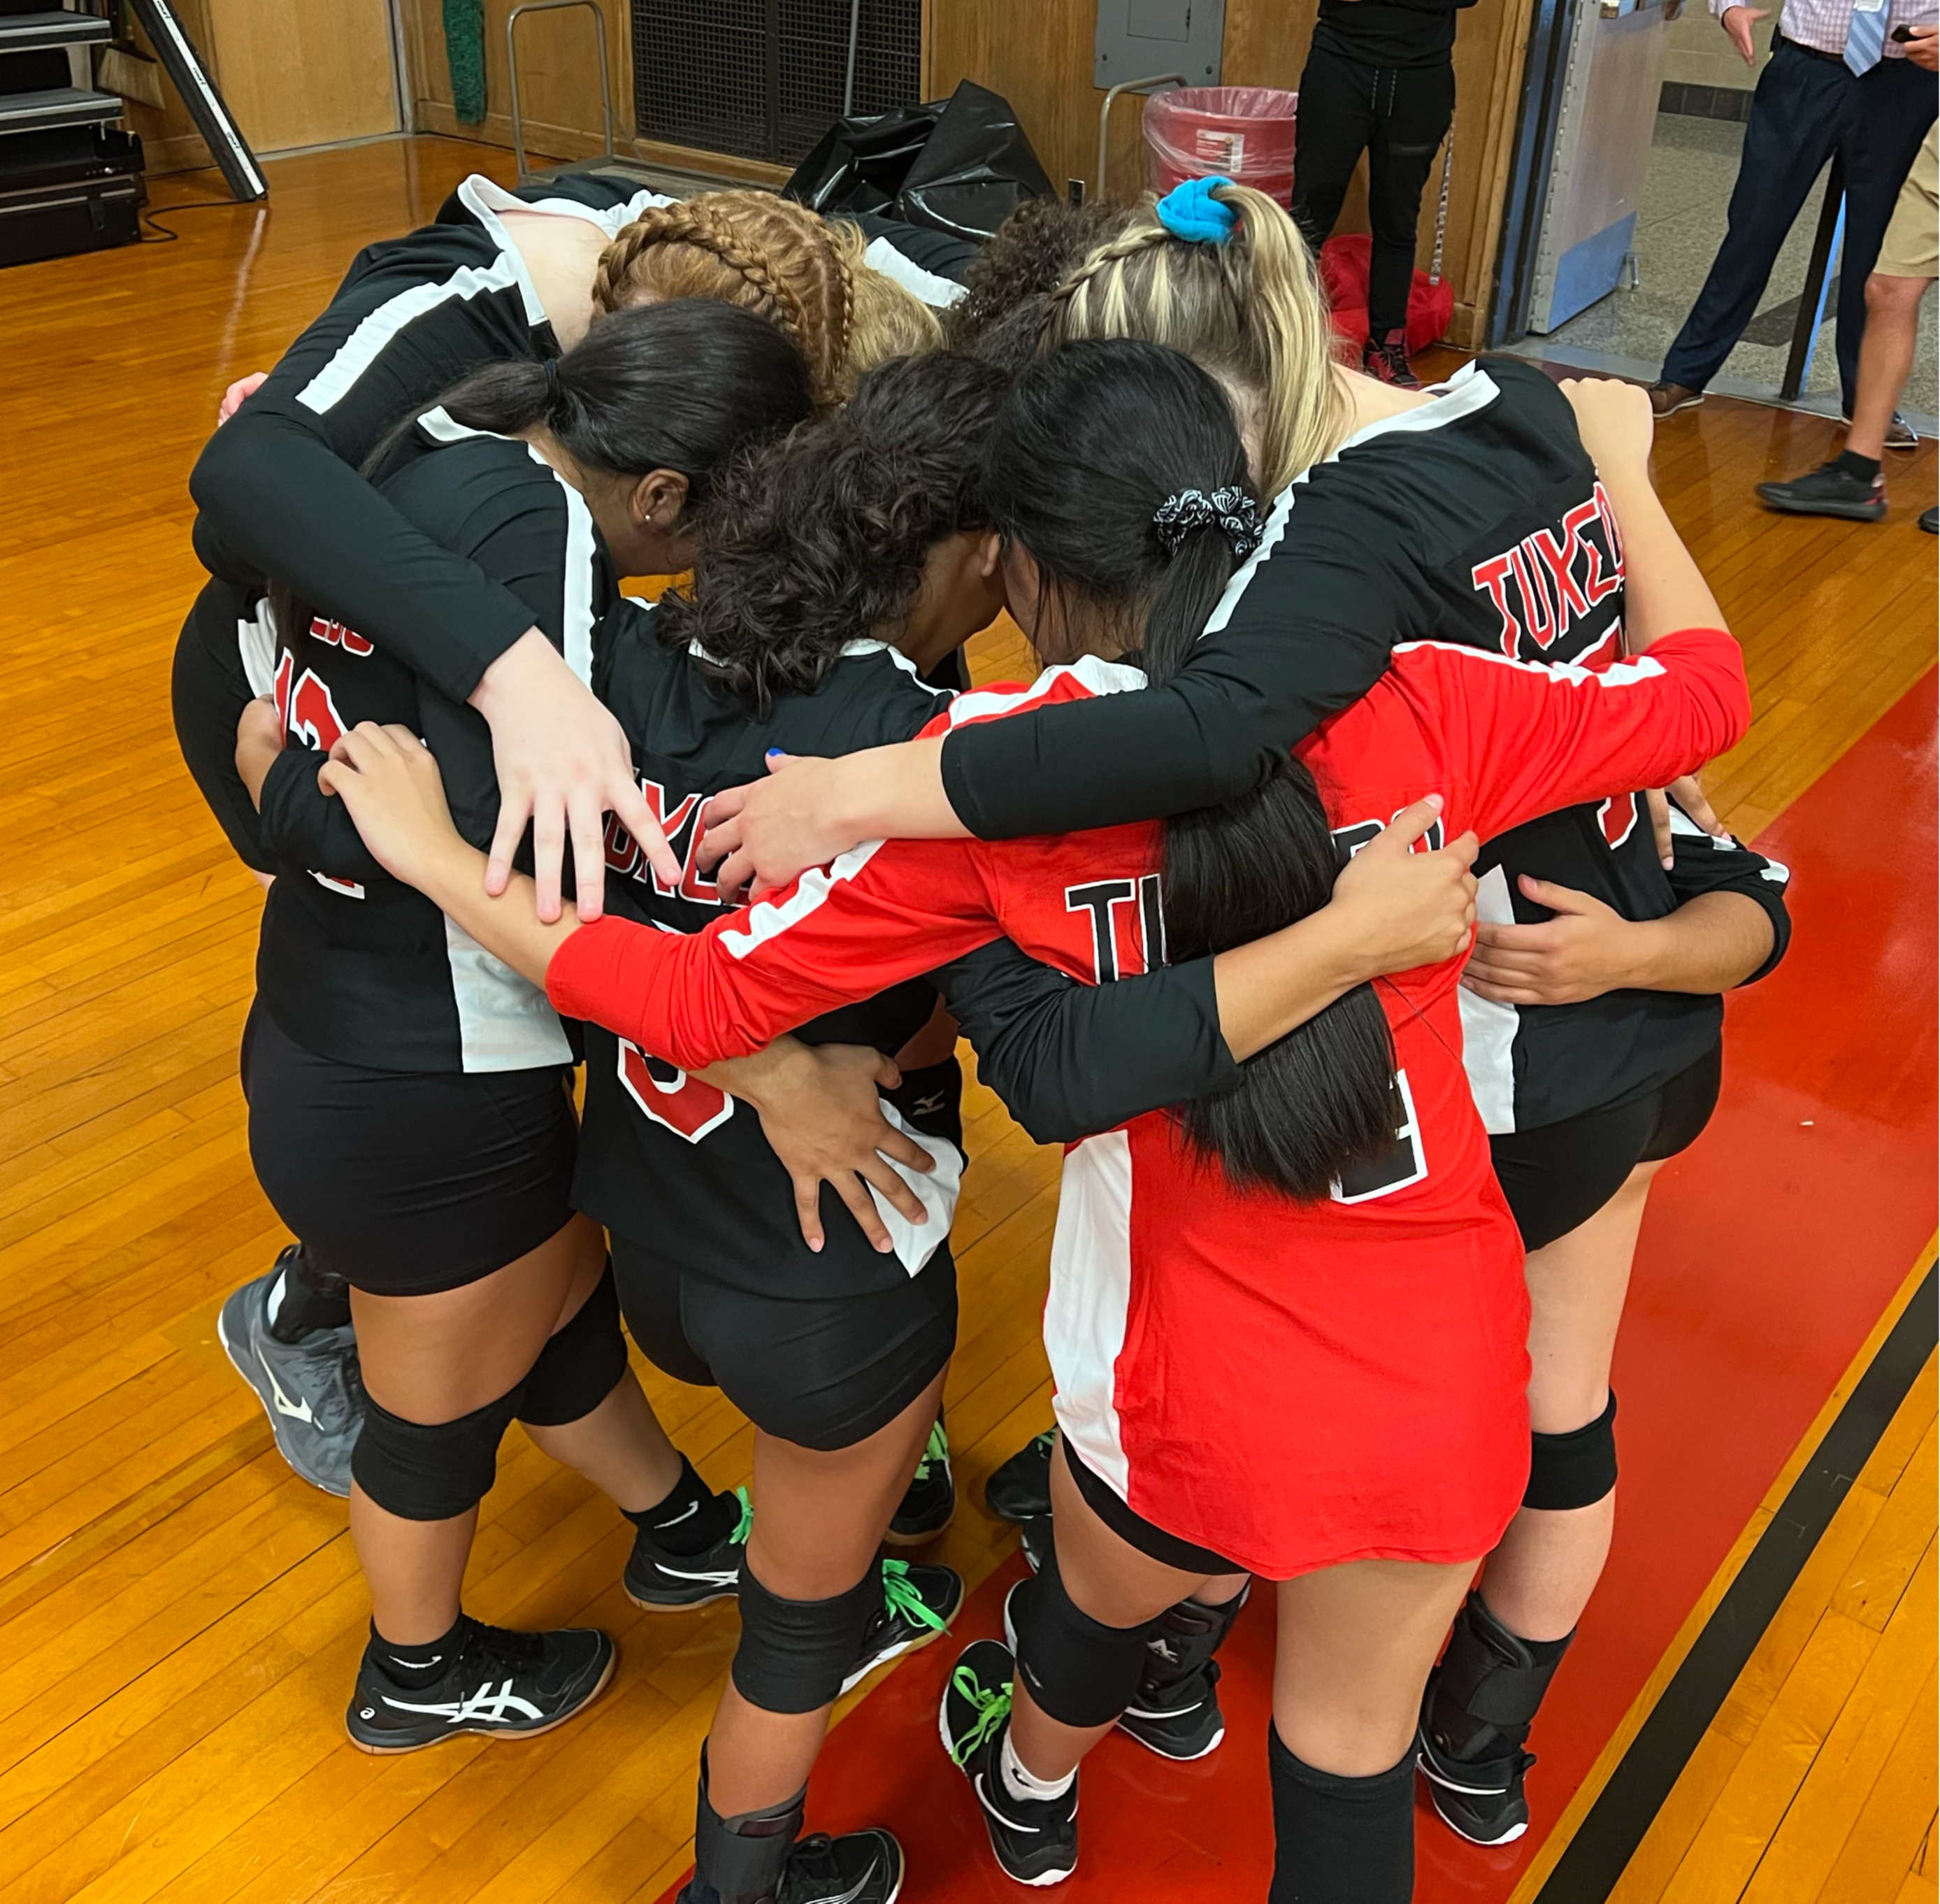 Volleyball players in huddle before game